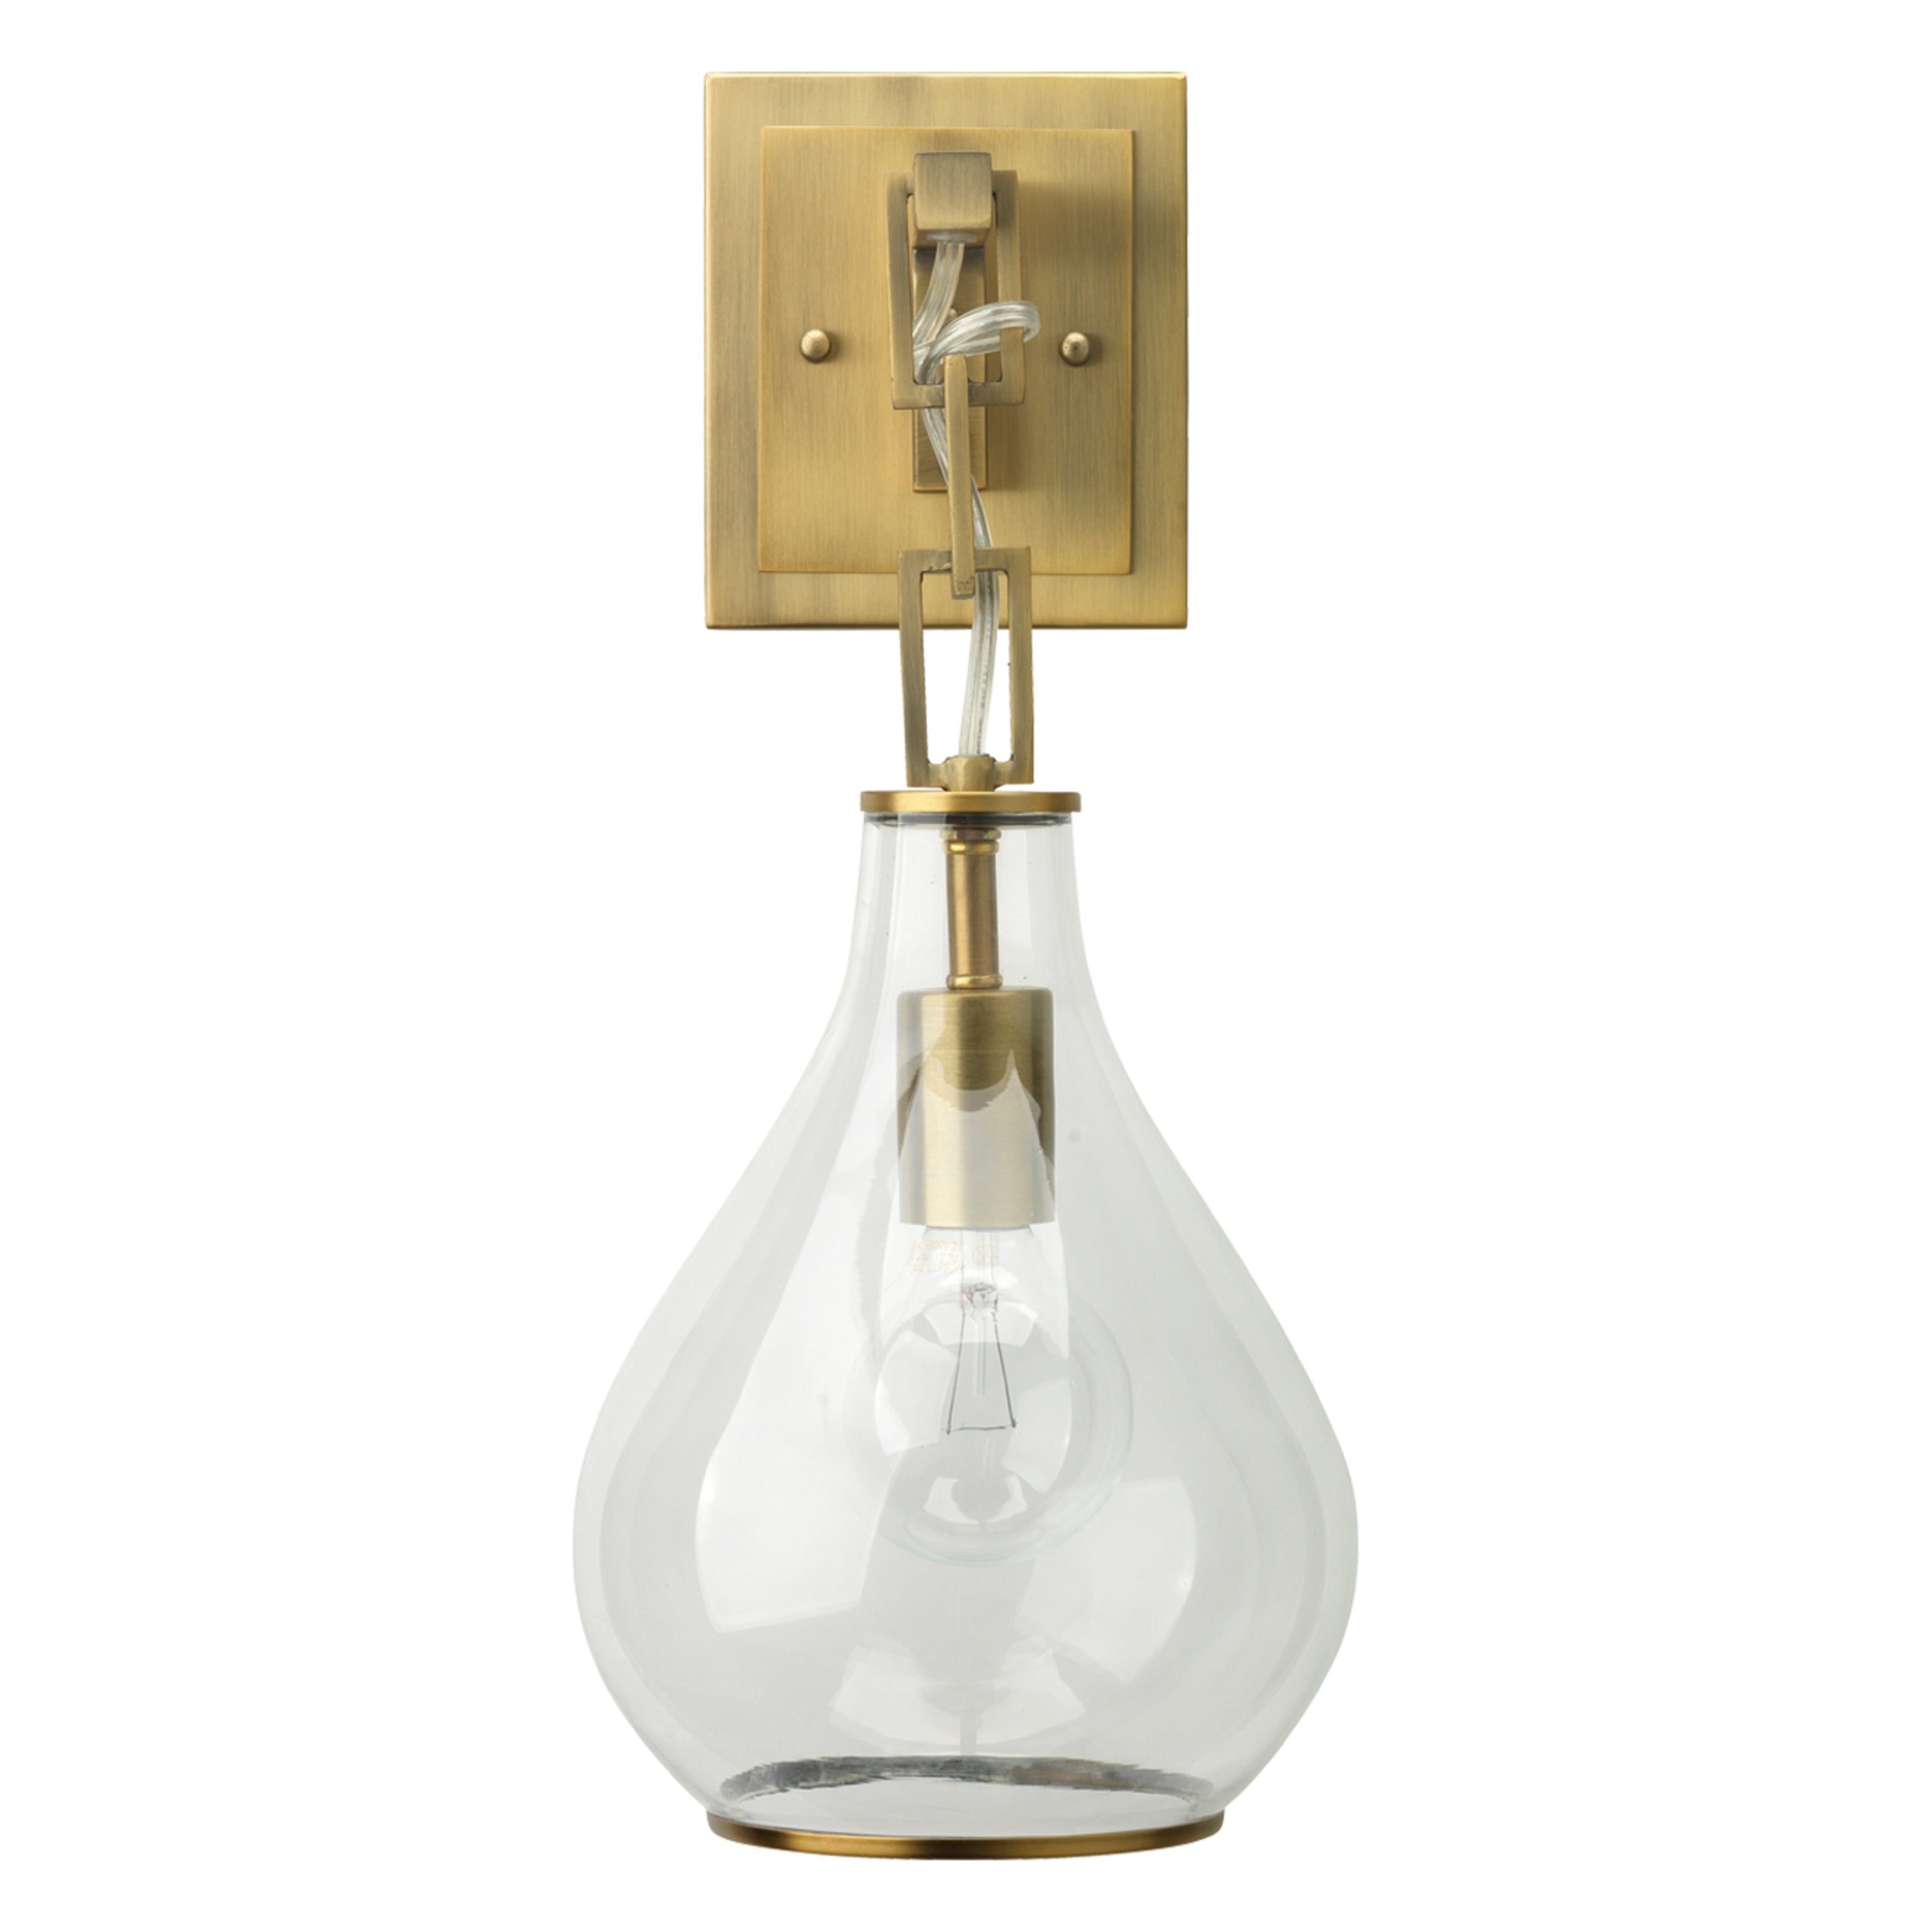 Jamie Young Company - 4TEAR-CLAB - Tear Drop Hanging Wall Sconce - Tear - Antique Brass, Clear Glass